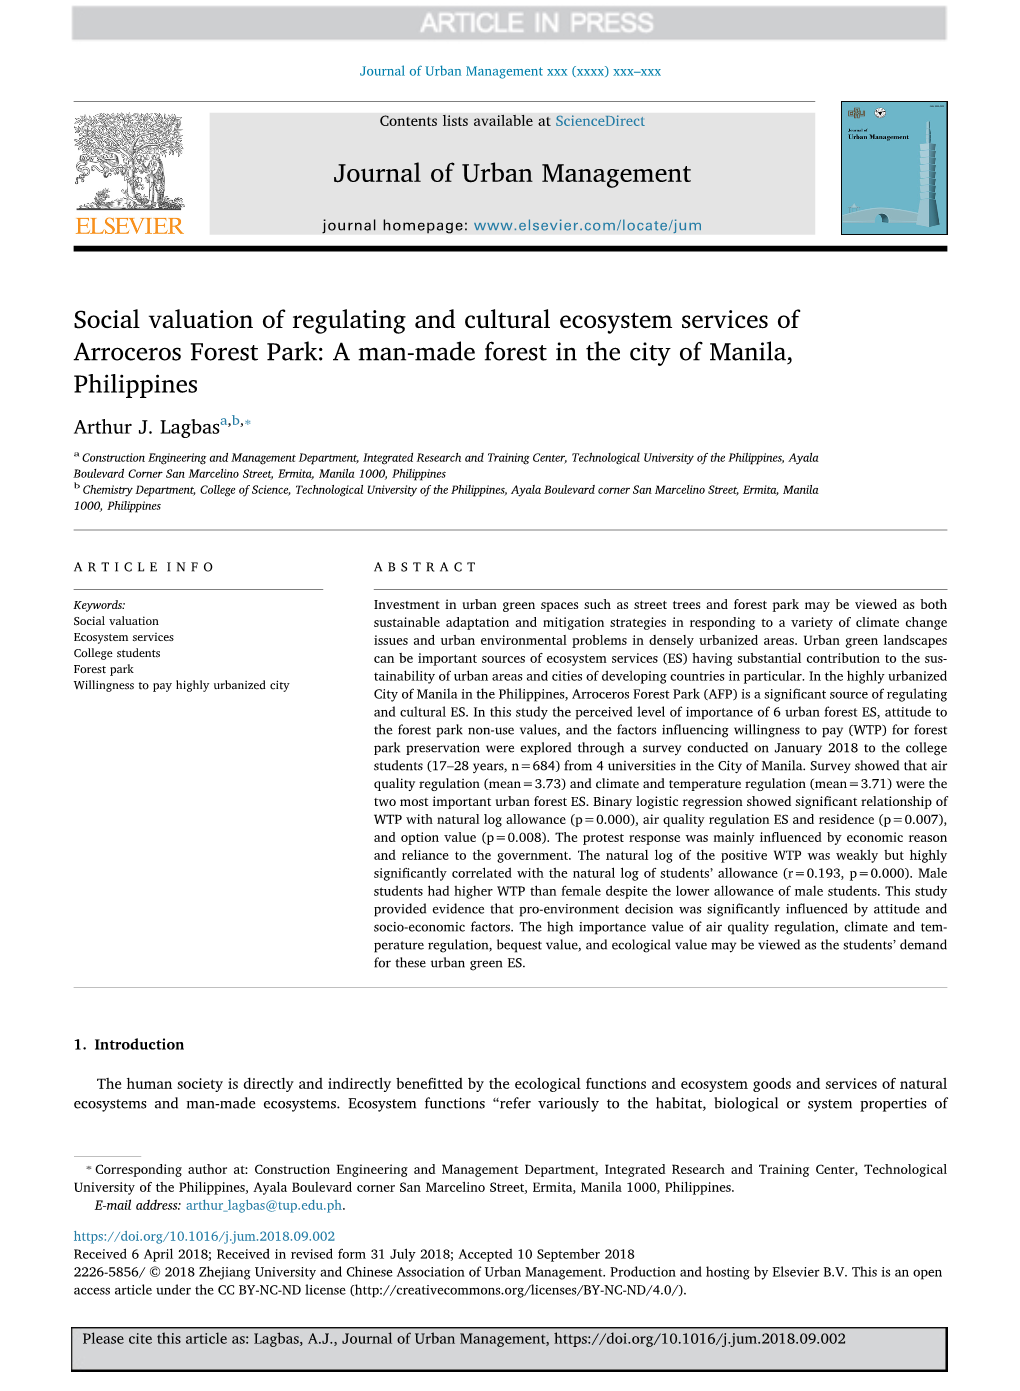 Social Valuation of Regulating and Cultural Ecosystem Services of Arroceros Forest Park a Man-Made Forest in the City of Manila